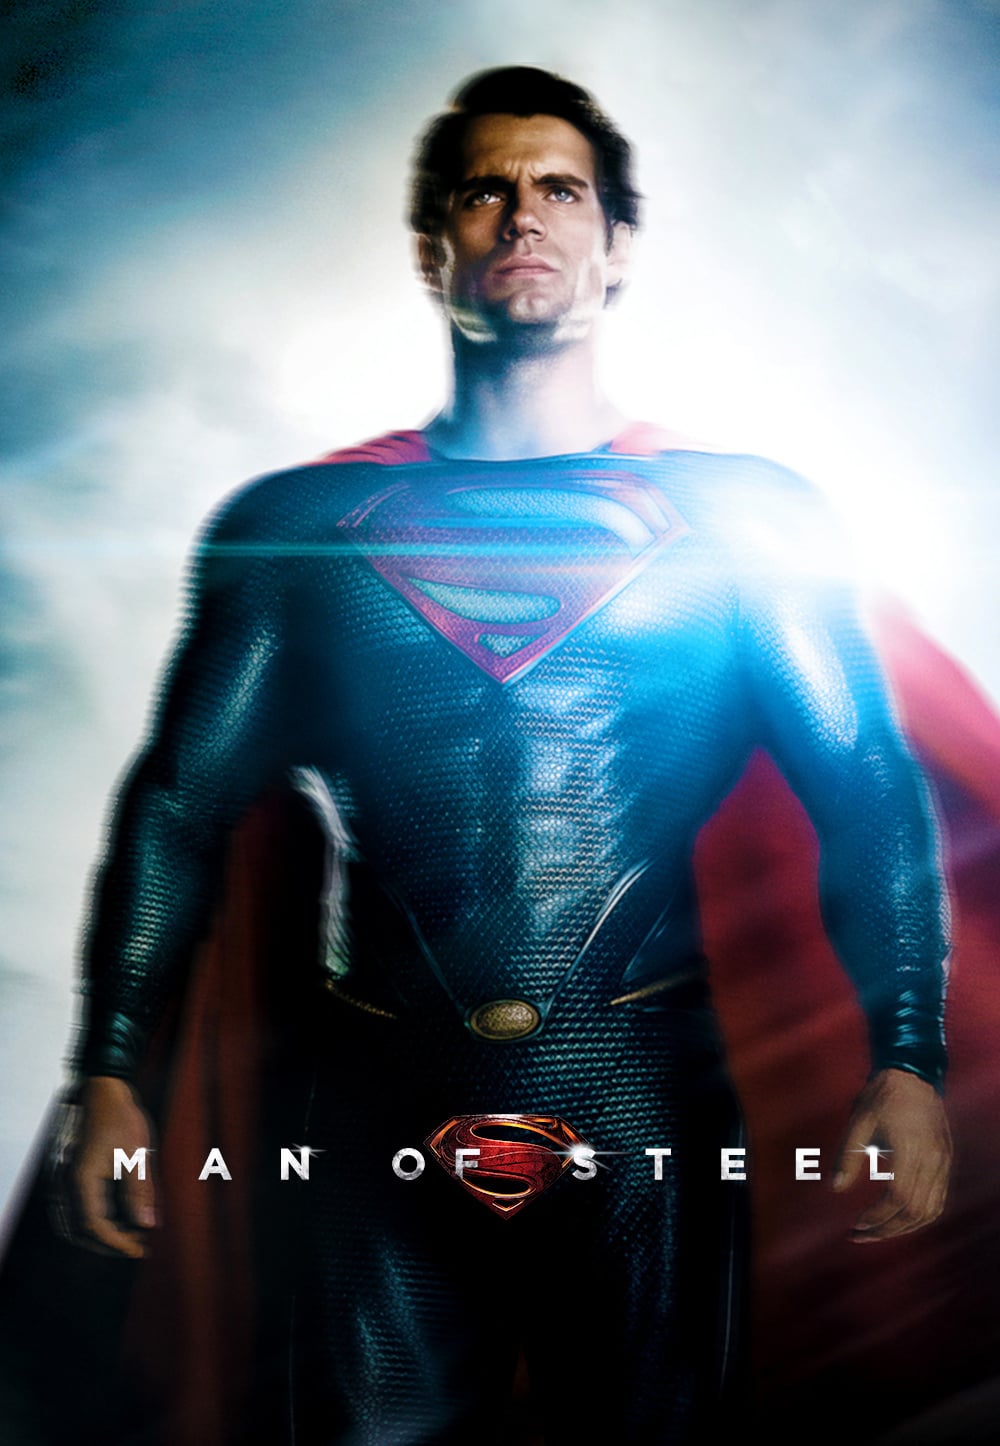 Man Of Steel Movie Poster - ID: 350934 - Image Abyss